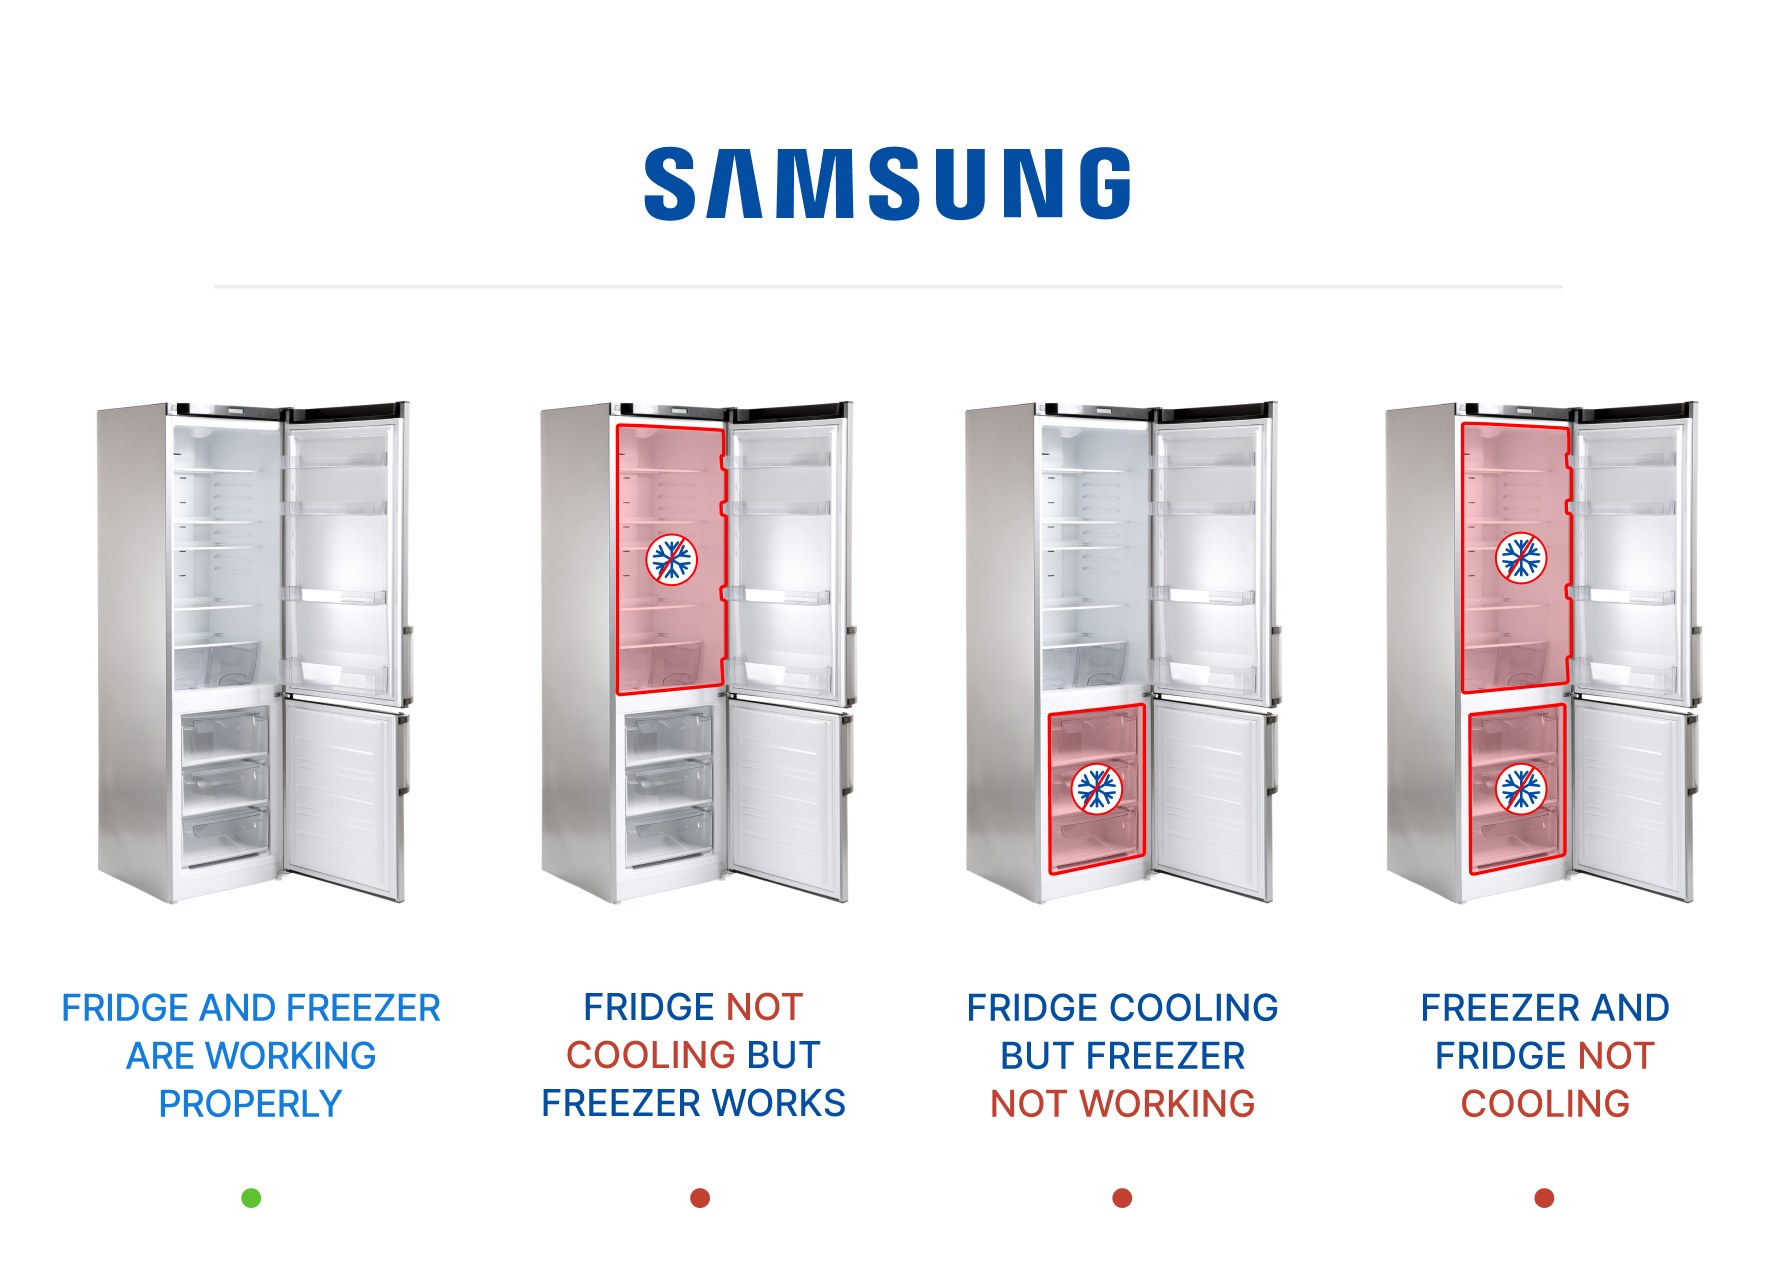 why is Samsung refrigerator not cooling